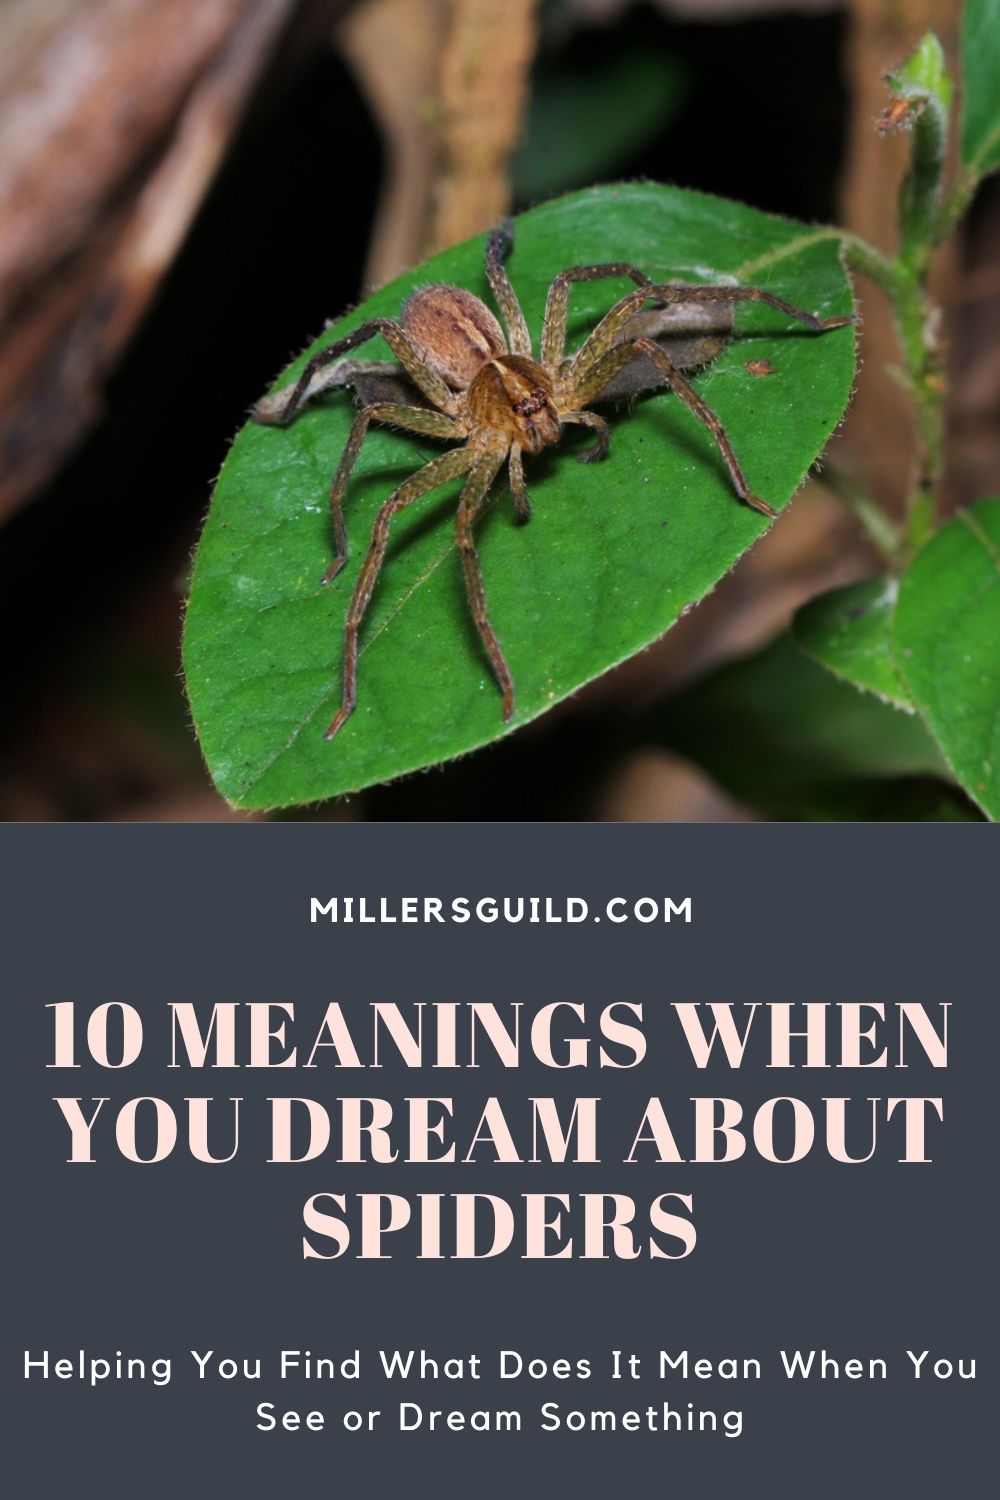 10 Meanings When You Dream About Spiders